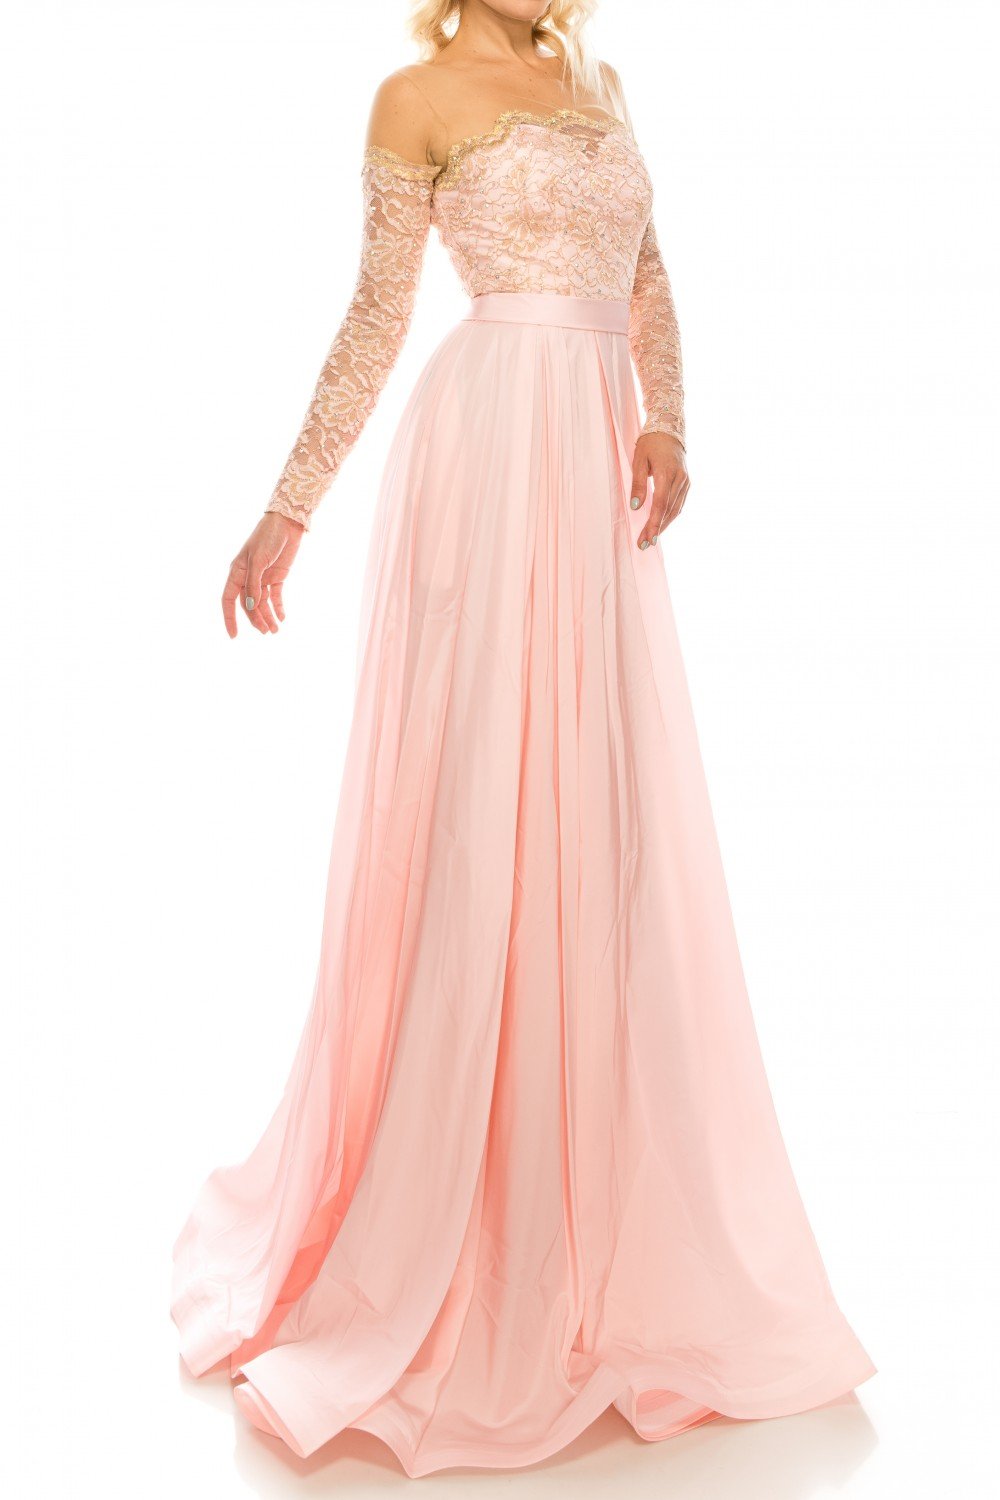 Odrella - 4514 Illusion Off Shoulder Long Sleeve A-Line Gown In Pink